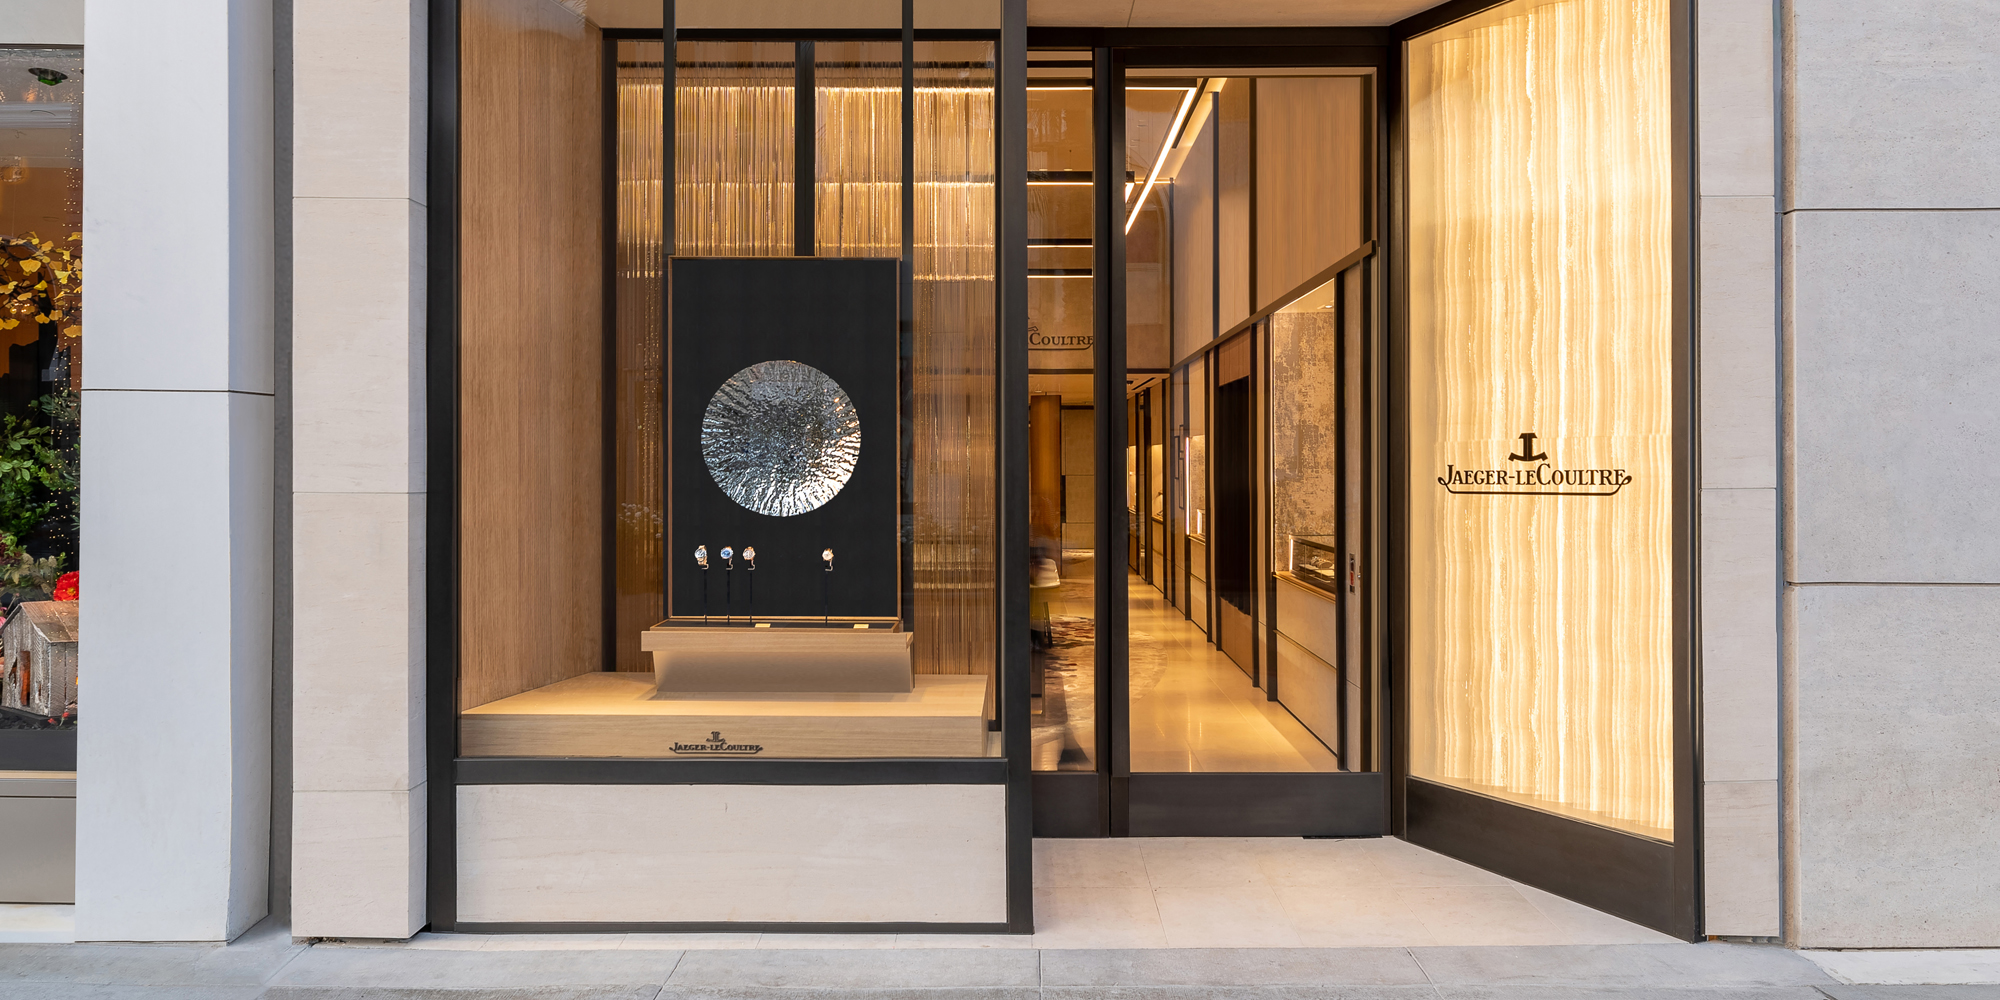 JAEGER LECOULTRE BOUTIQUE IN BEVERLY HILLS